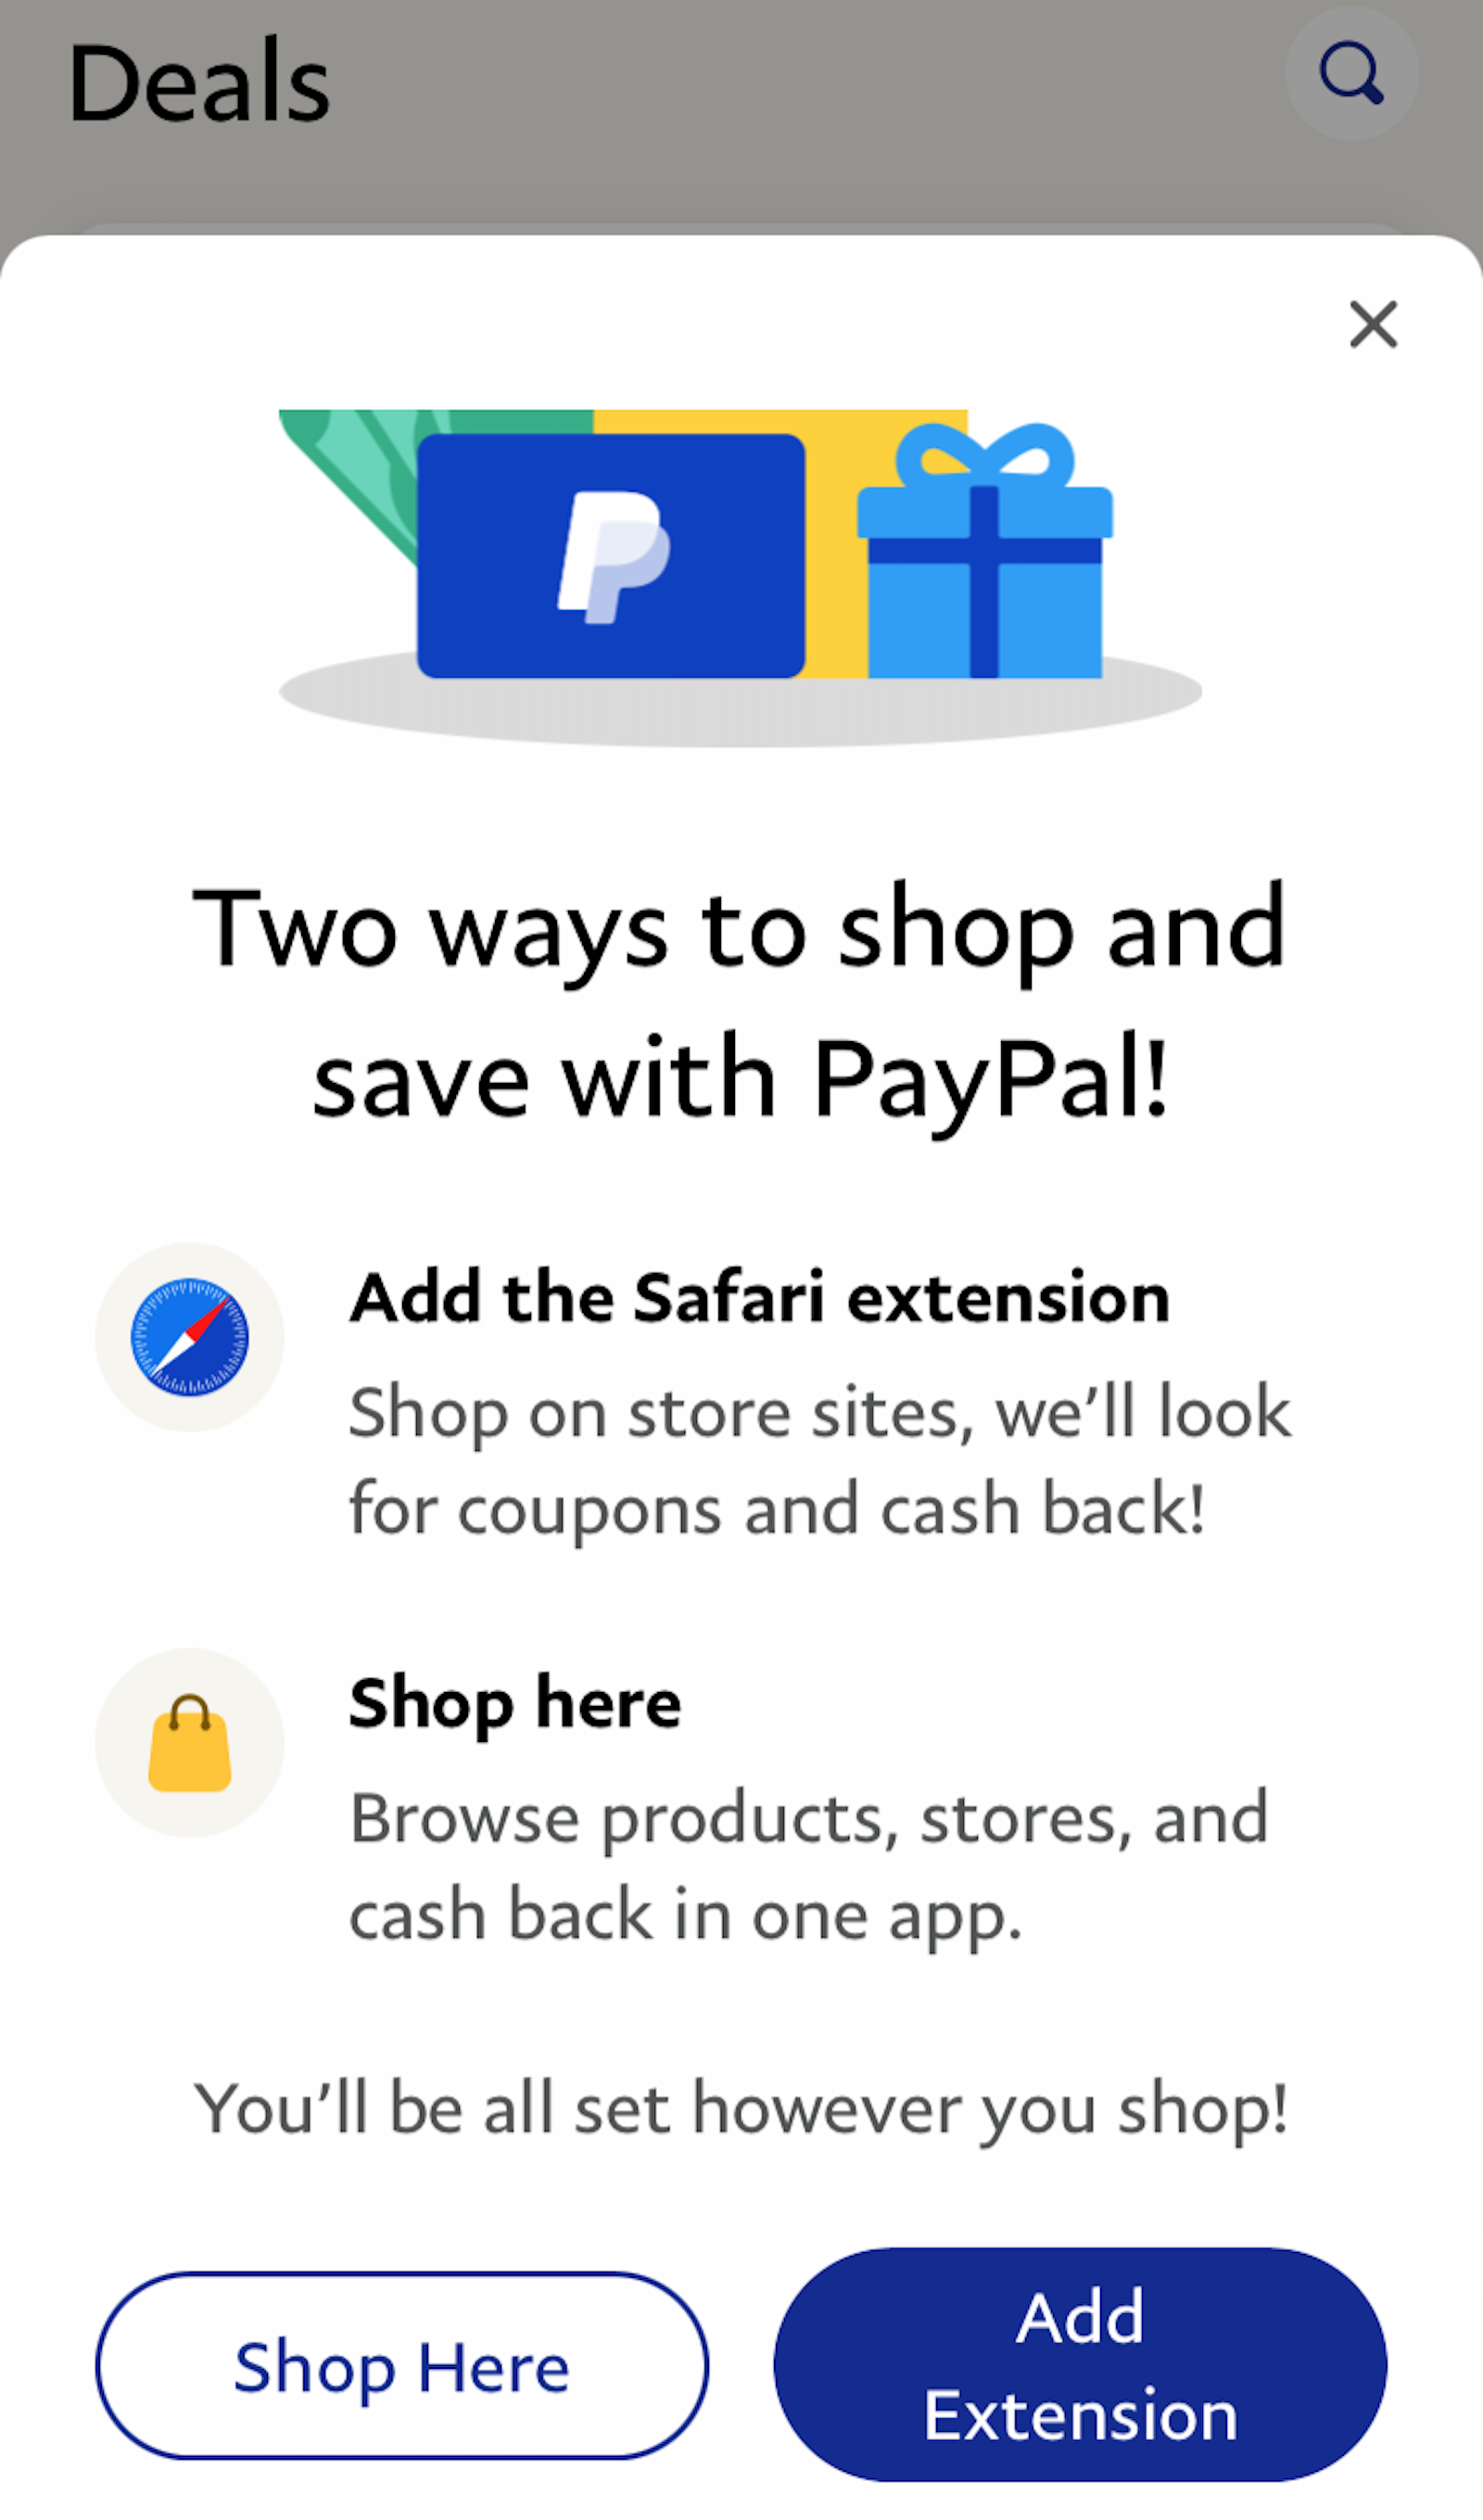 There's a new PayPal Rewards program. Here's what you need to know